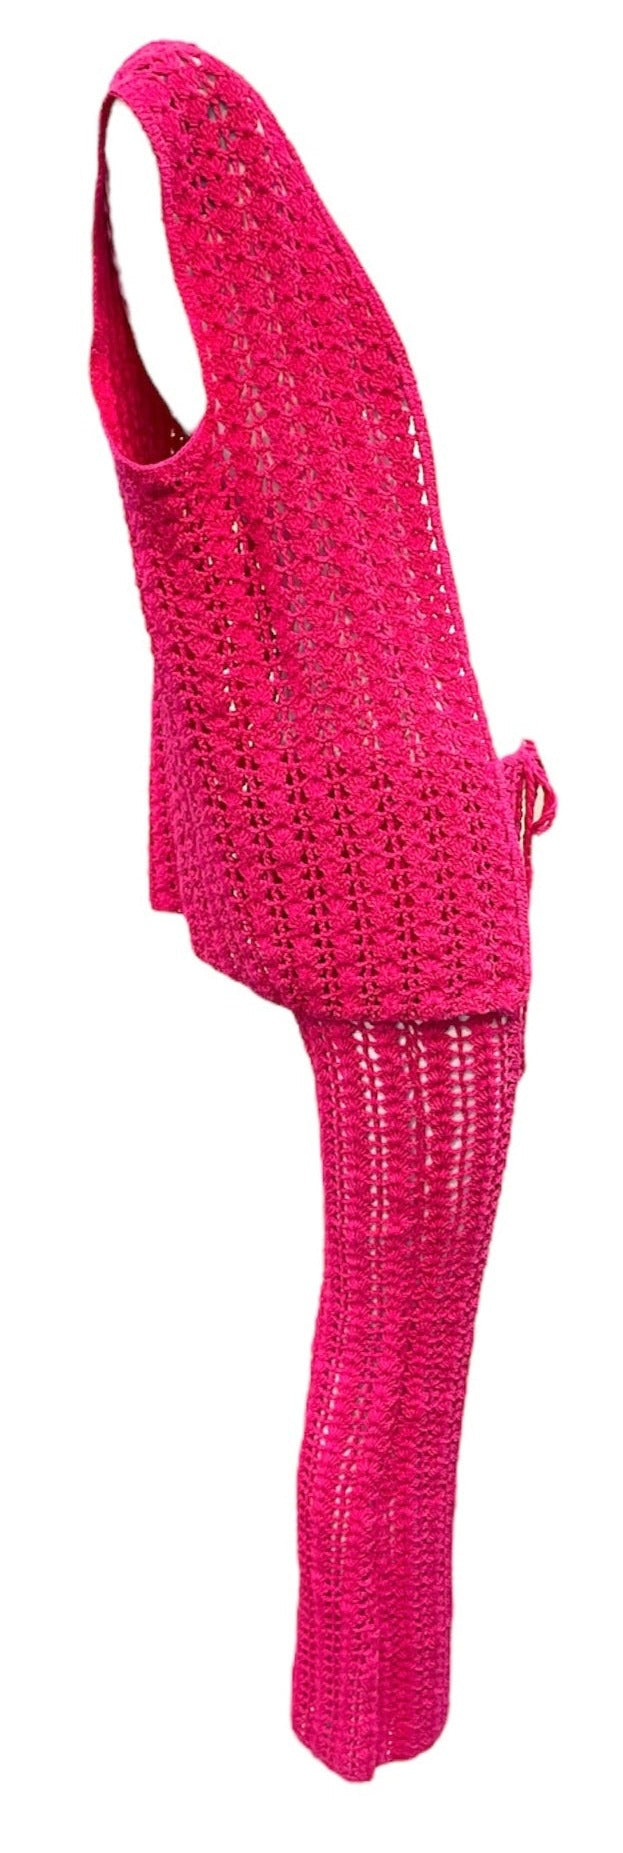 60s Hot Pink Hand Crochet Pant Suit SIDE2 of 5